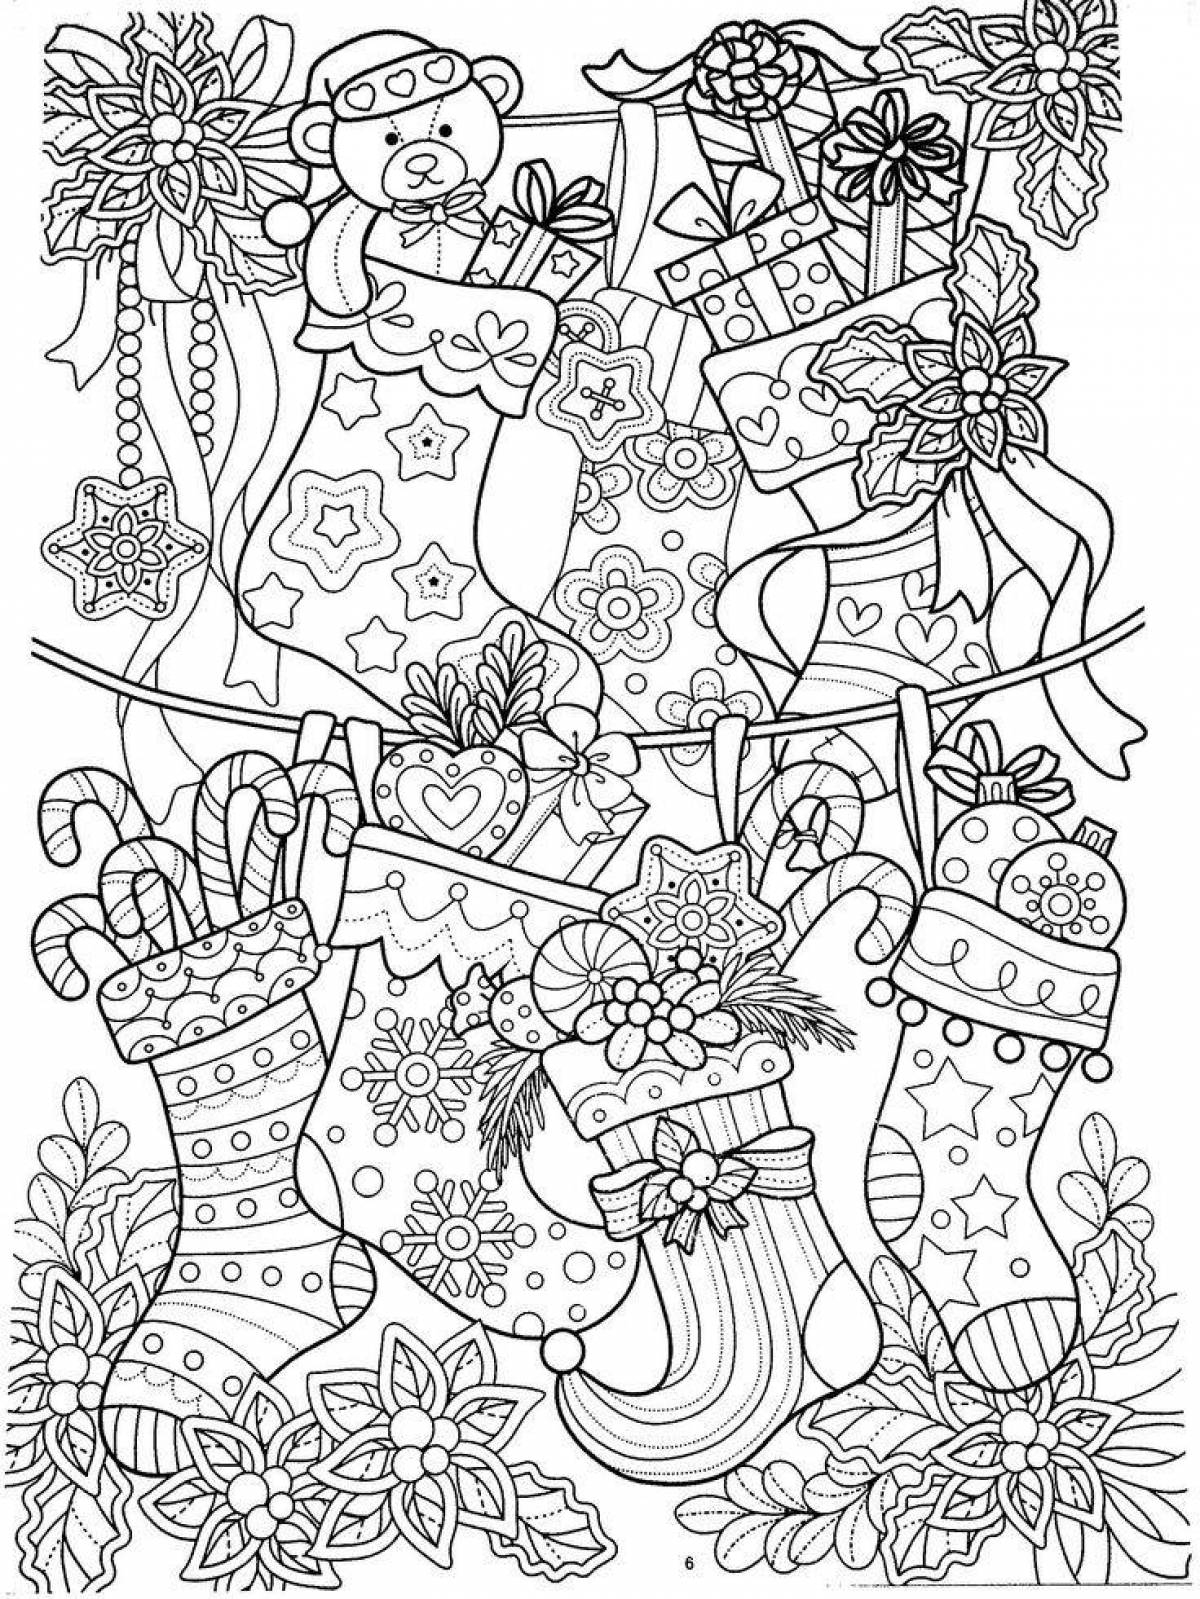 Awesome Christmas complex coloring book